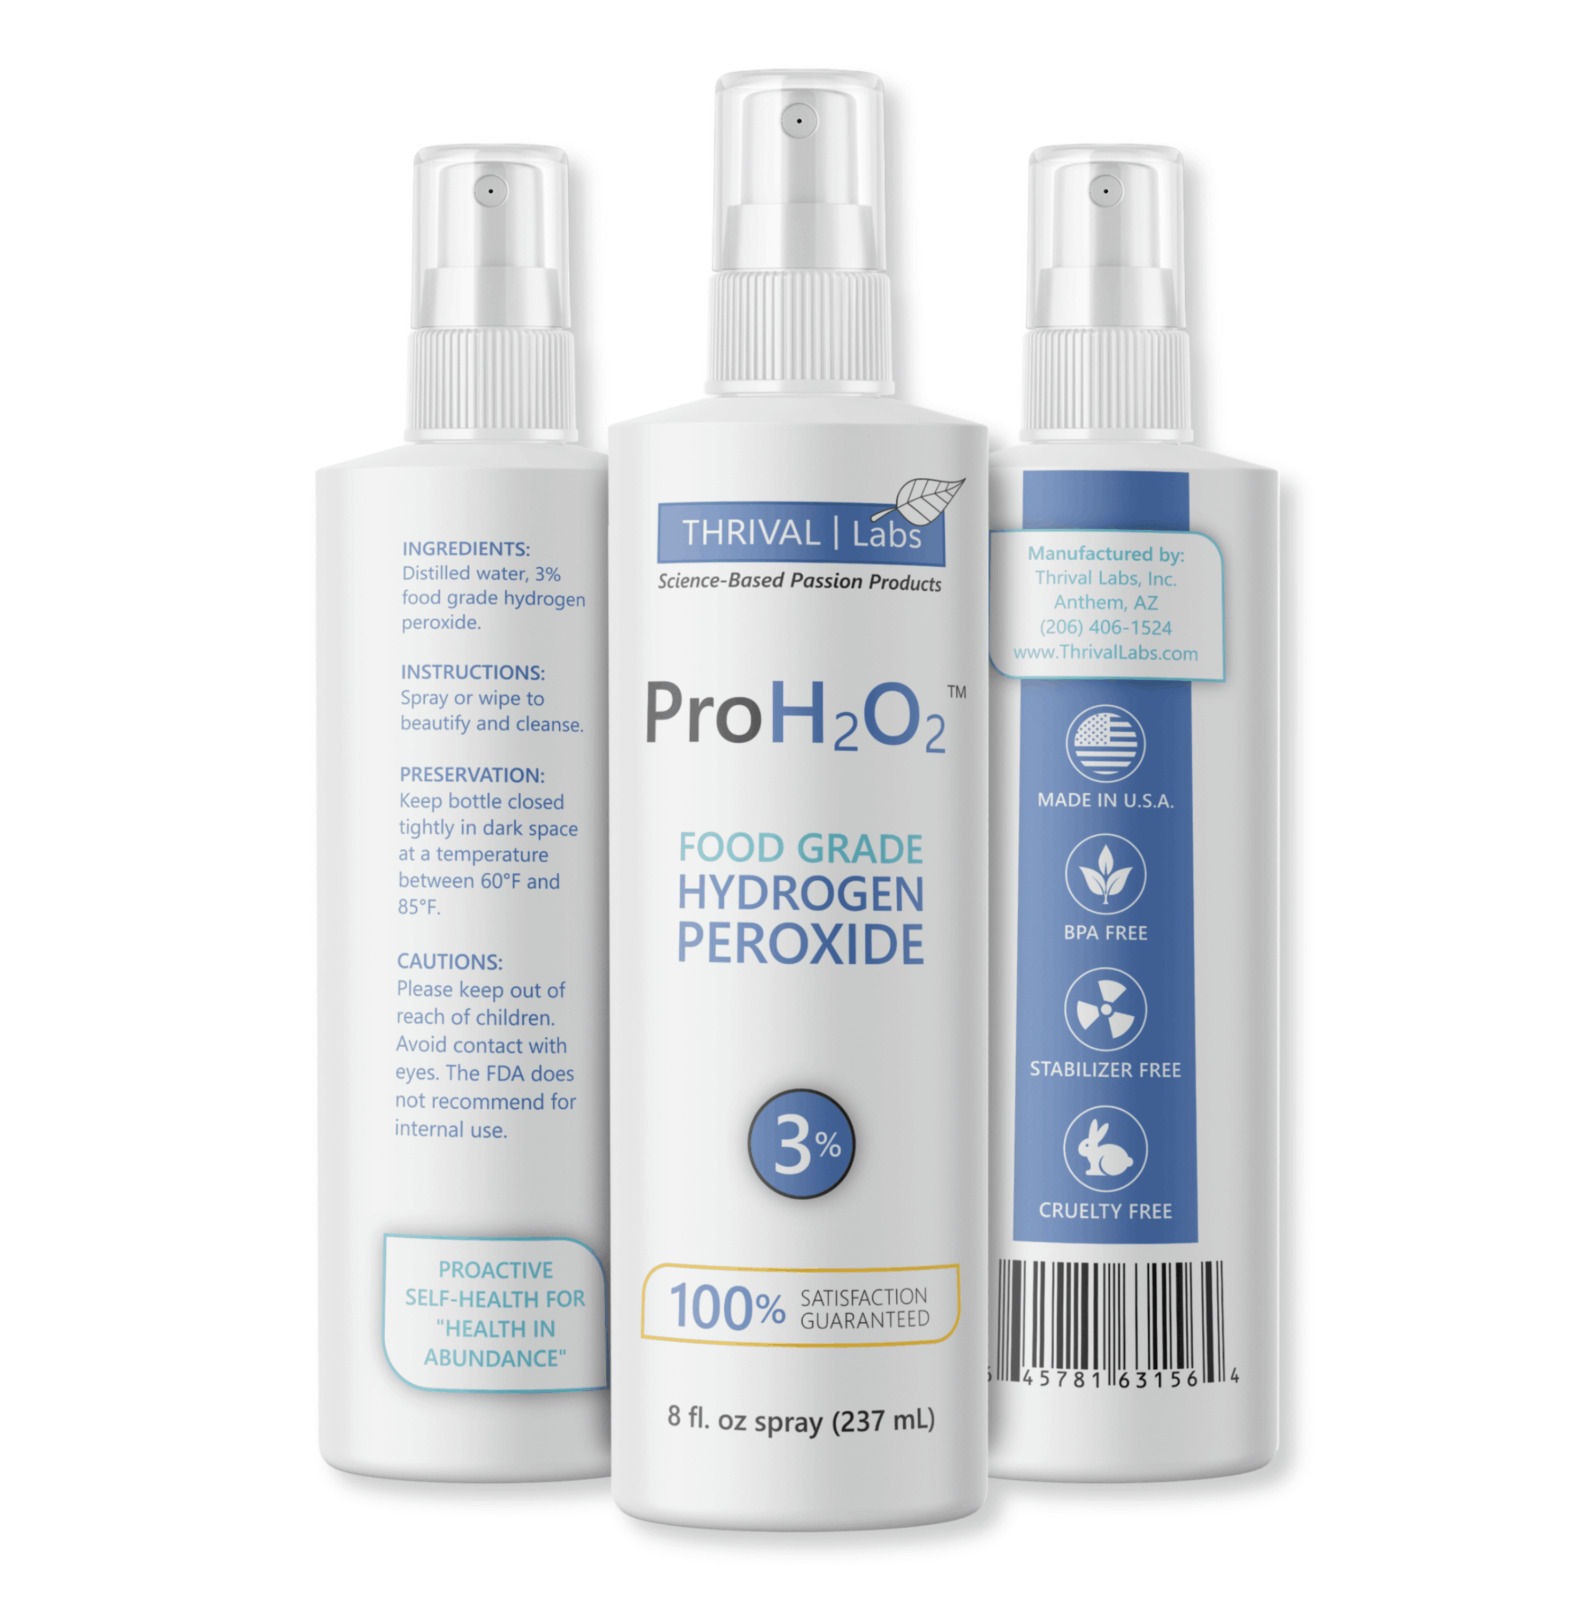 ProH2O2 Food Grade Hydrogen Peroxide 3%, 8oz Spray Bottle by Thrival Labs